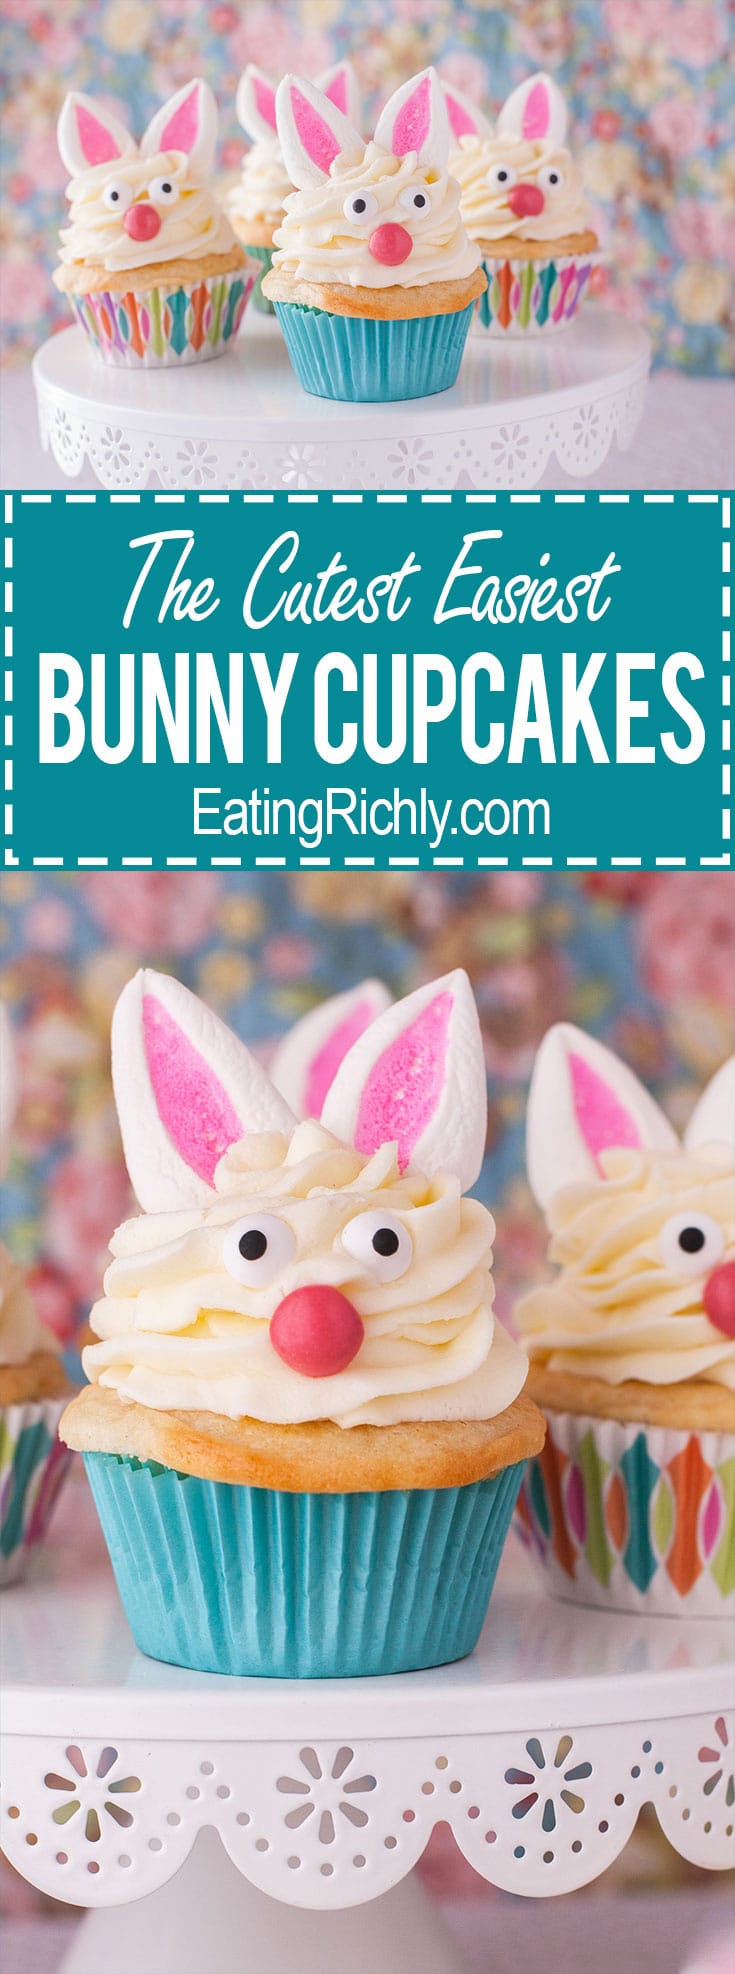 You won't believe how cute these marshmallow bunny cupcakes are, and how easy they are to make! From EatingRichly.com